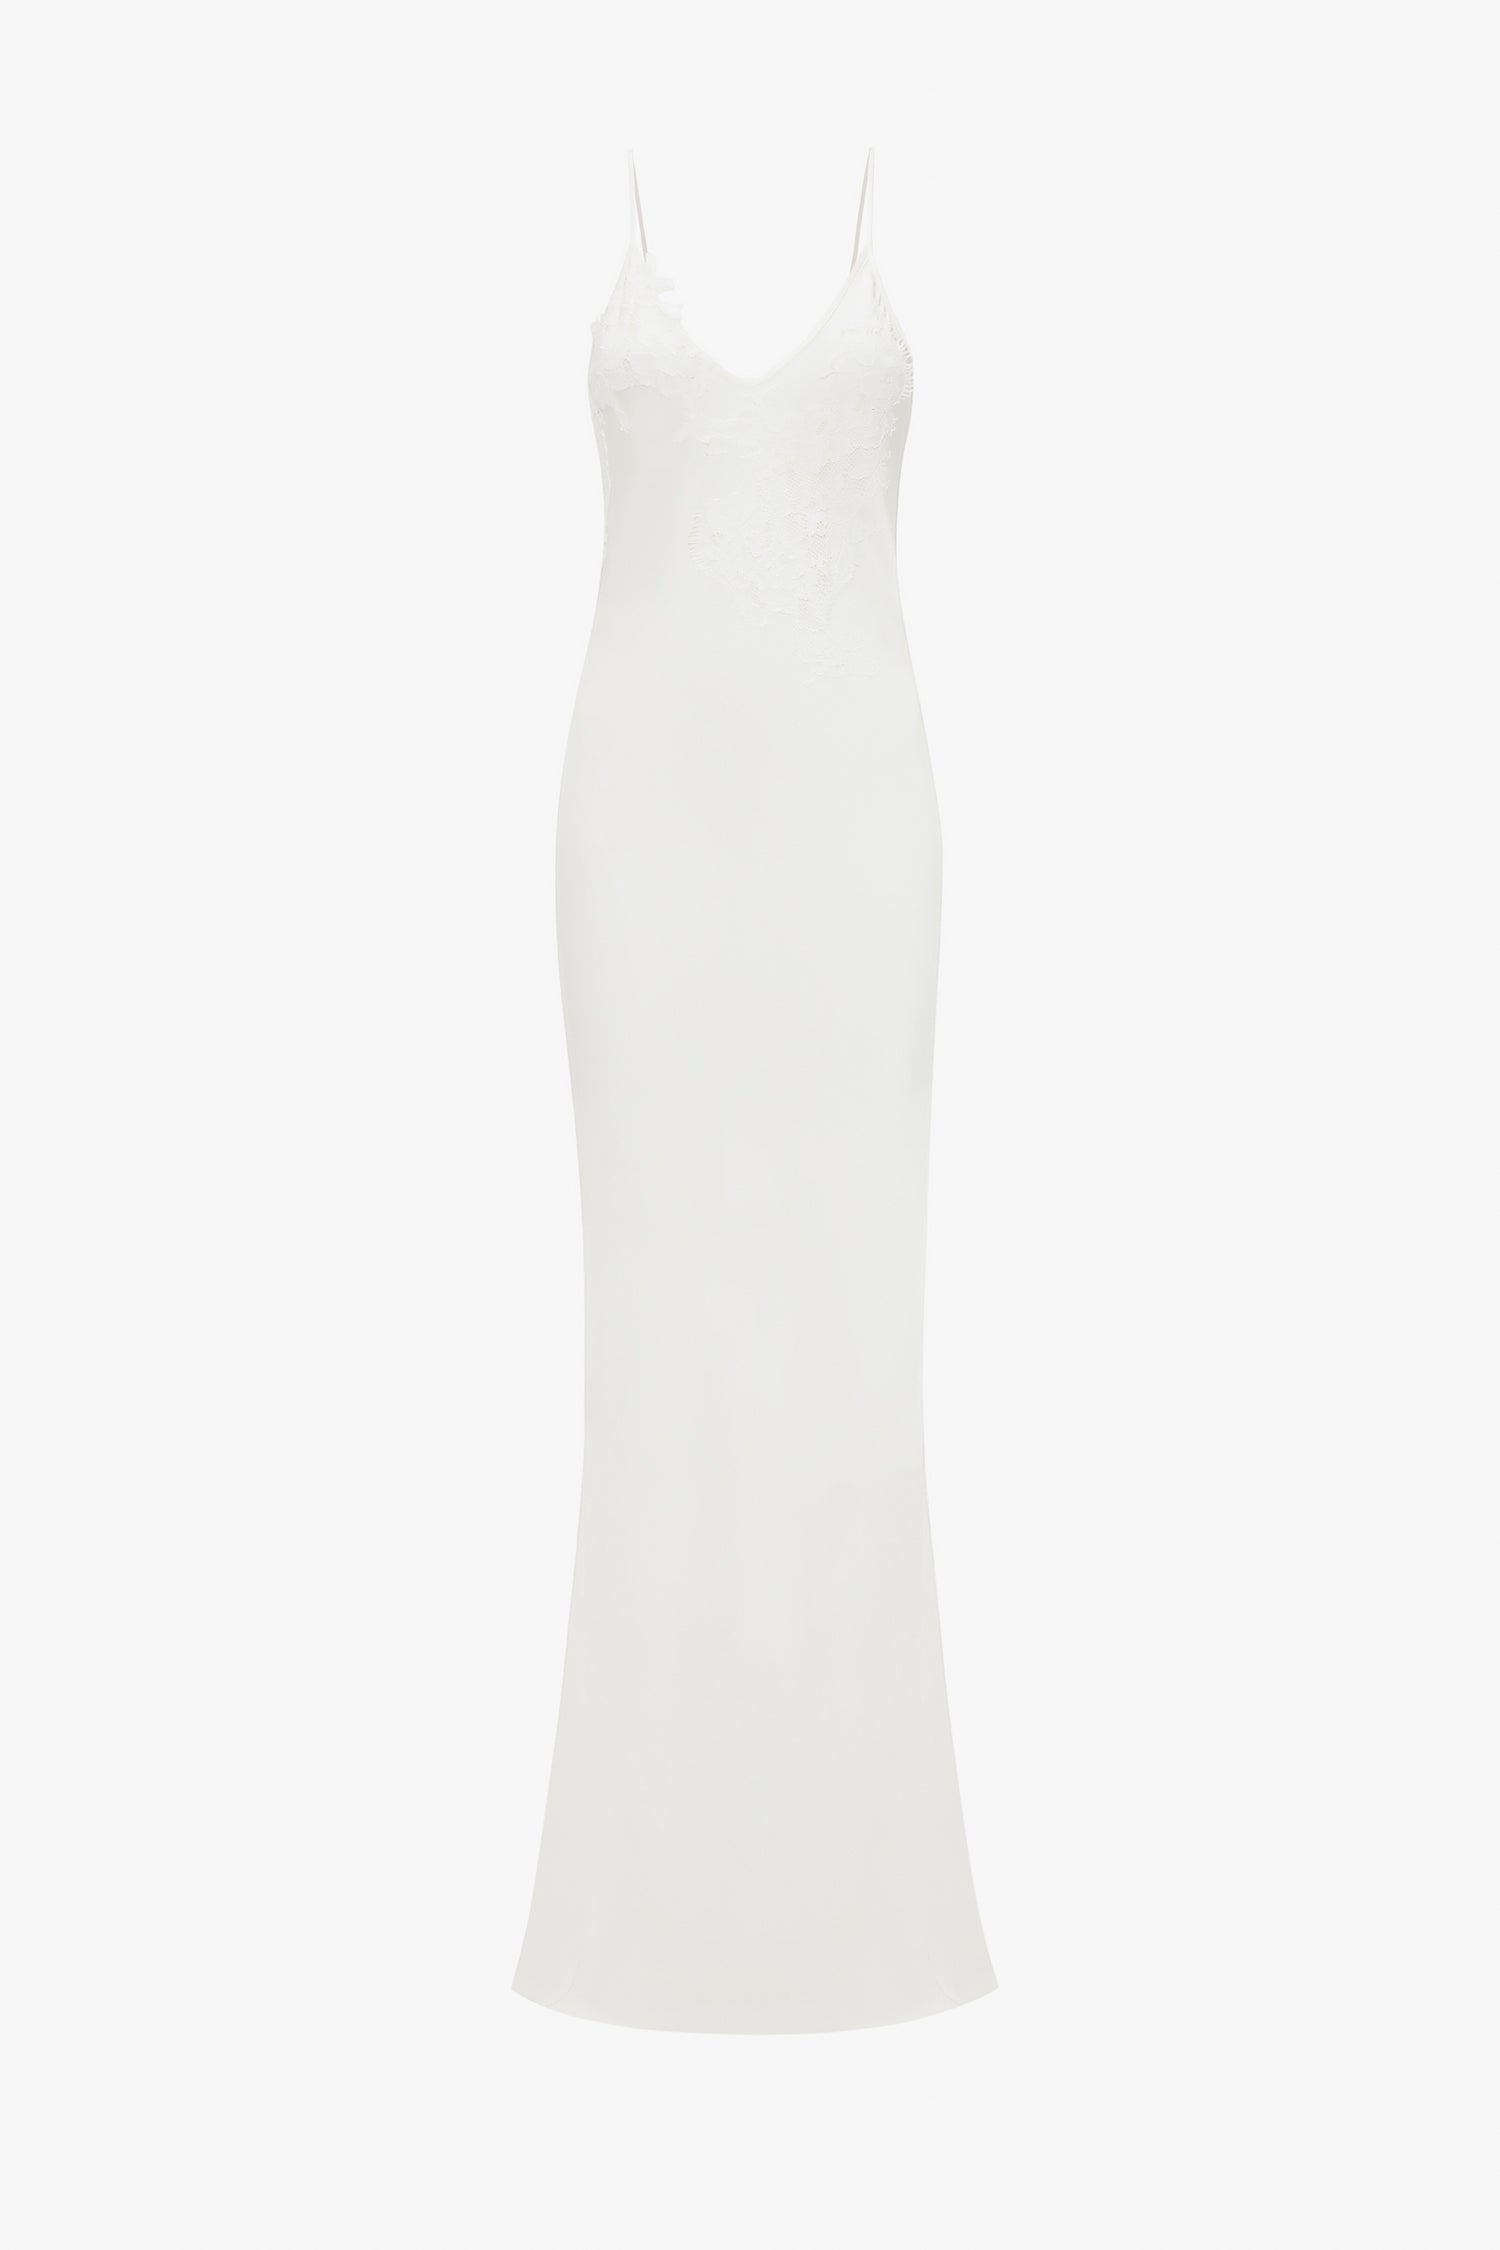 A white sleeveless bridal gown with lace appliqué detail on the bodice, displayed against a white background. 
Product Name: Exclusive Lace Detail Floor-Length Cami Dress In Ivory
Brand Name: Victoria Beckham